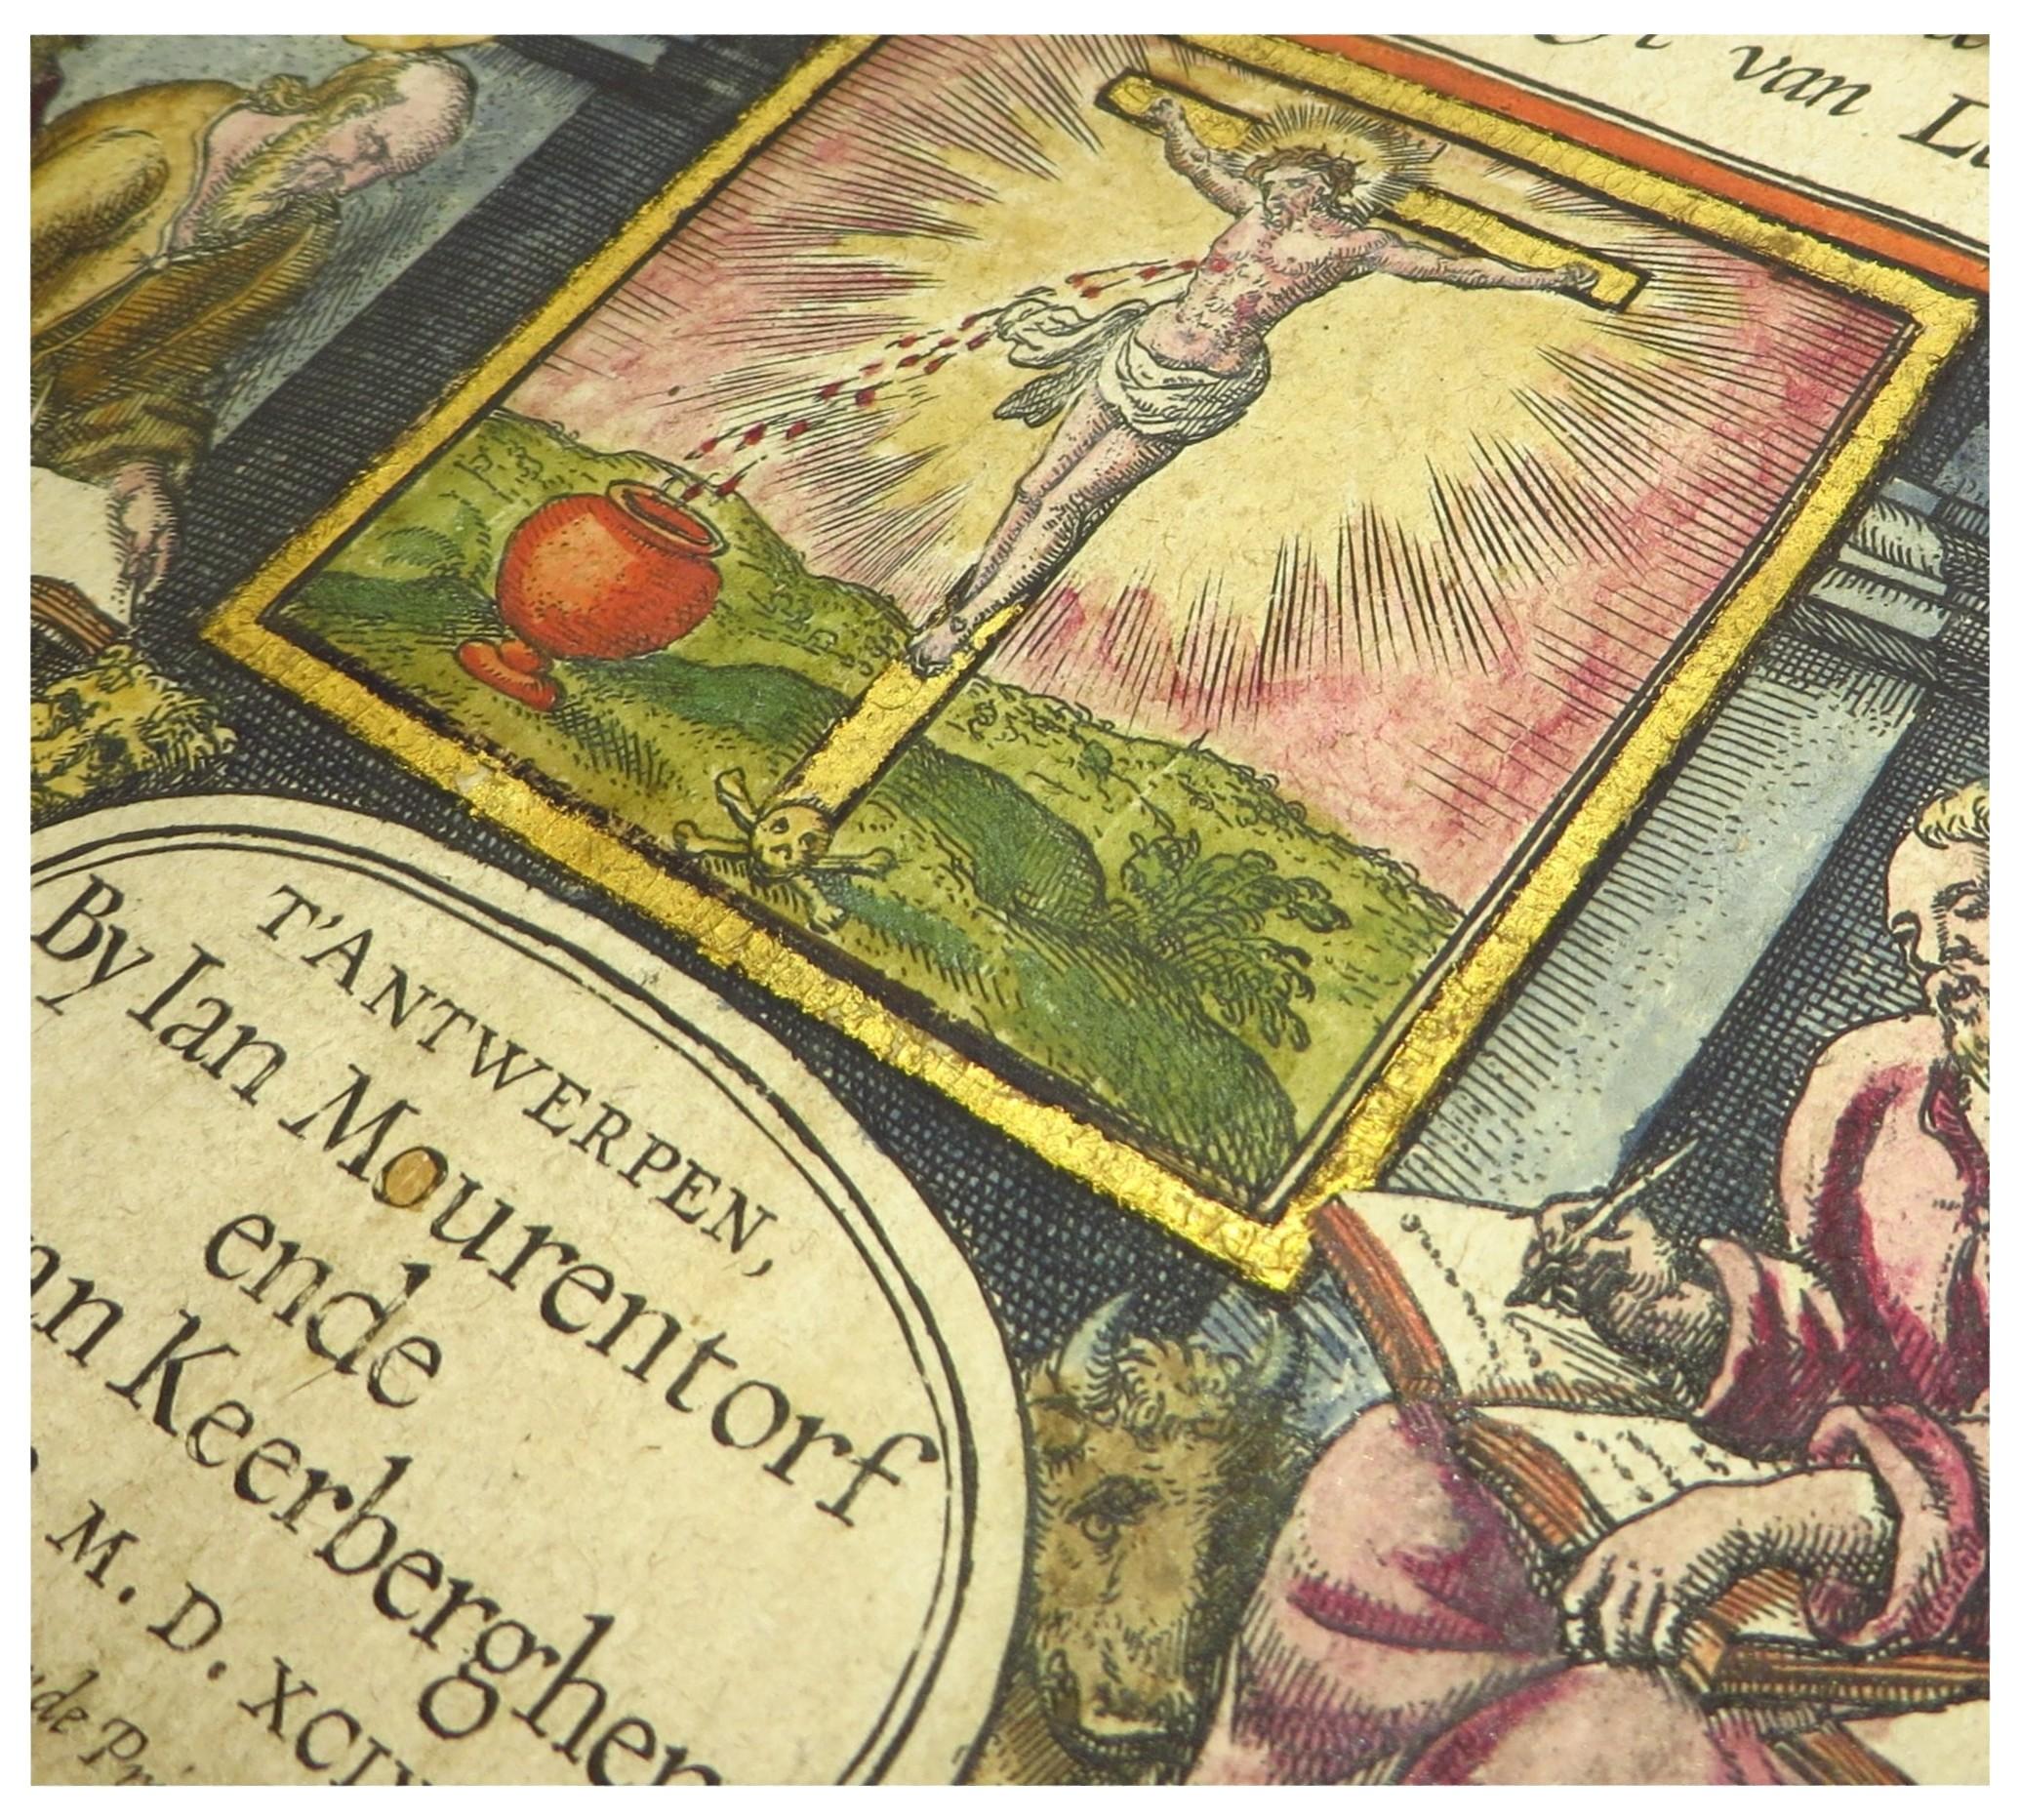 Baroque Hand-colored 16th century copy of the famous Moerentorf Bible For Sale